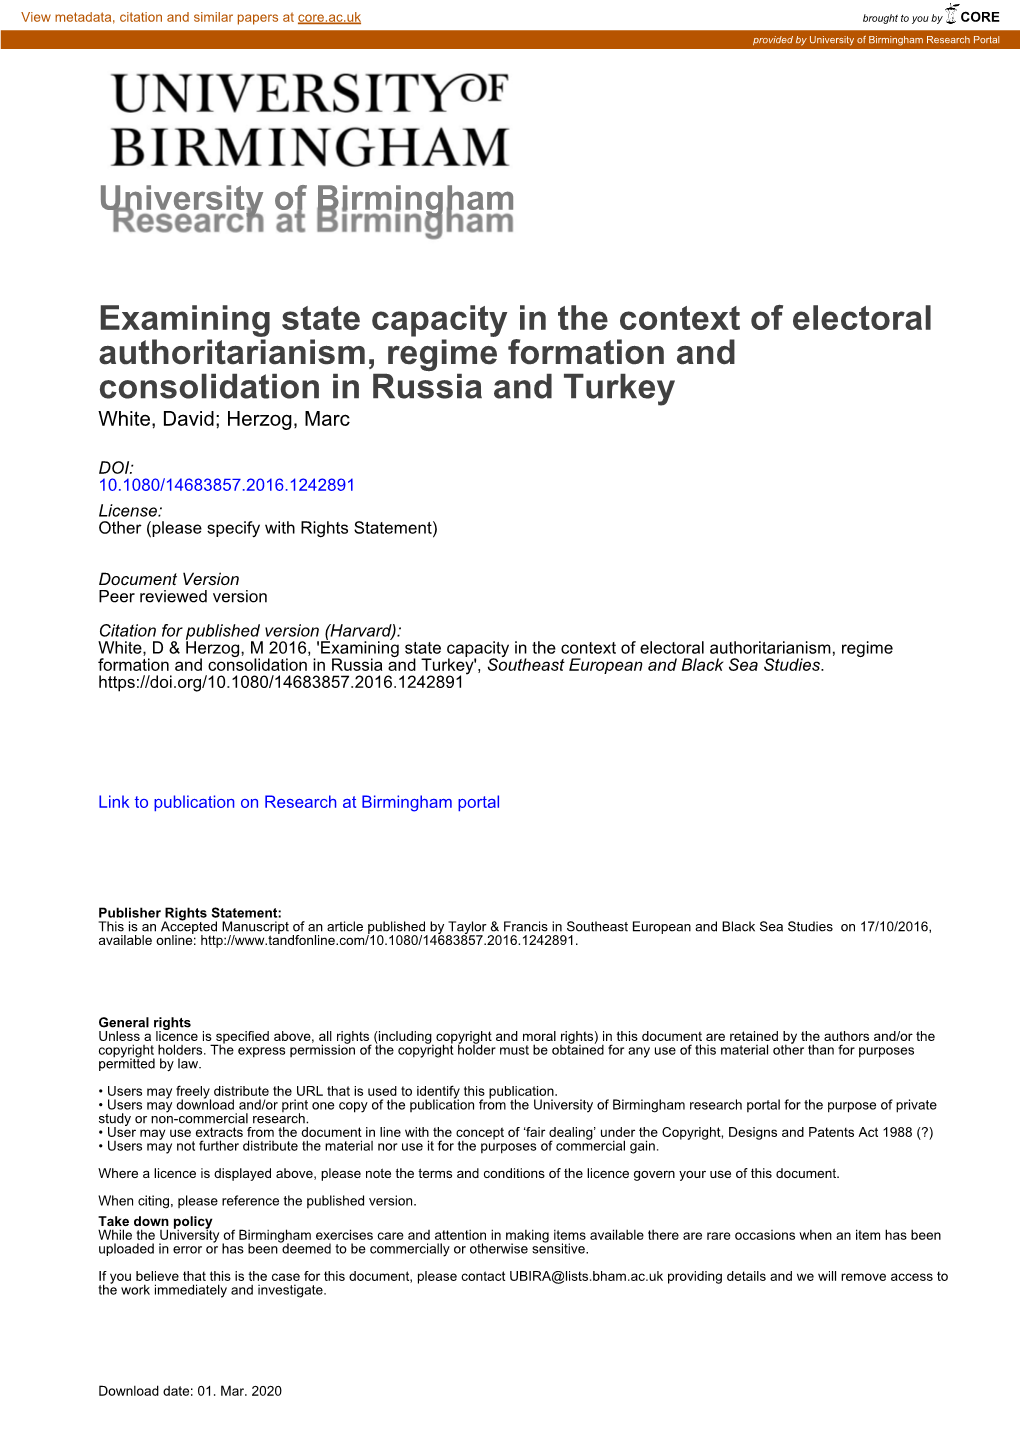 Examining State Capacity in the Context of Electoral Authoritarianism, Regime Formation and Consolidation in Russia and Turkey White, David; Herzog, Marc